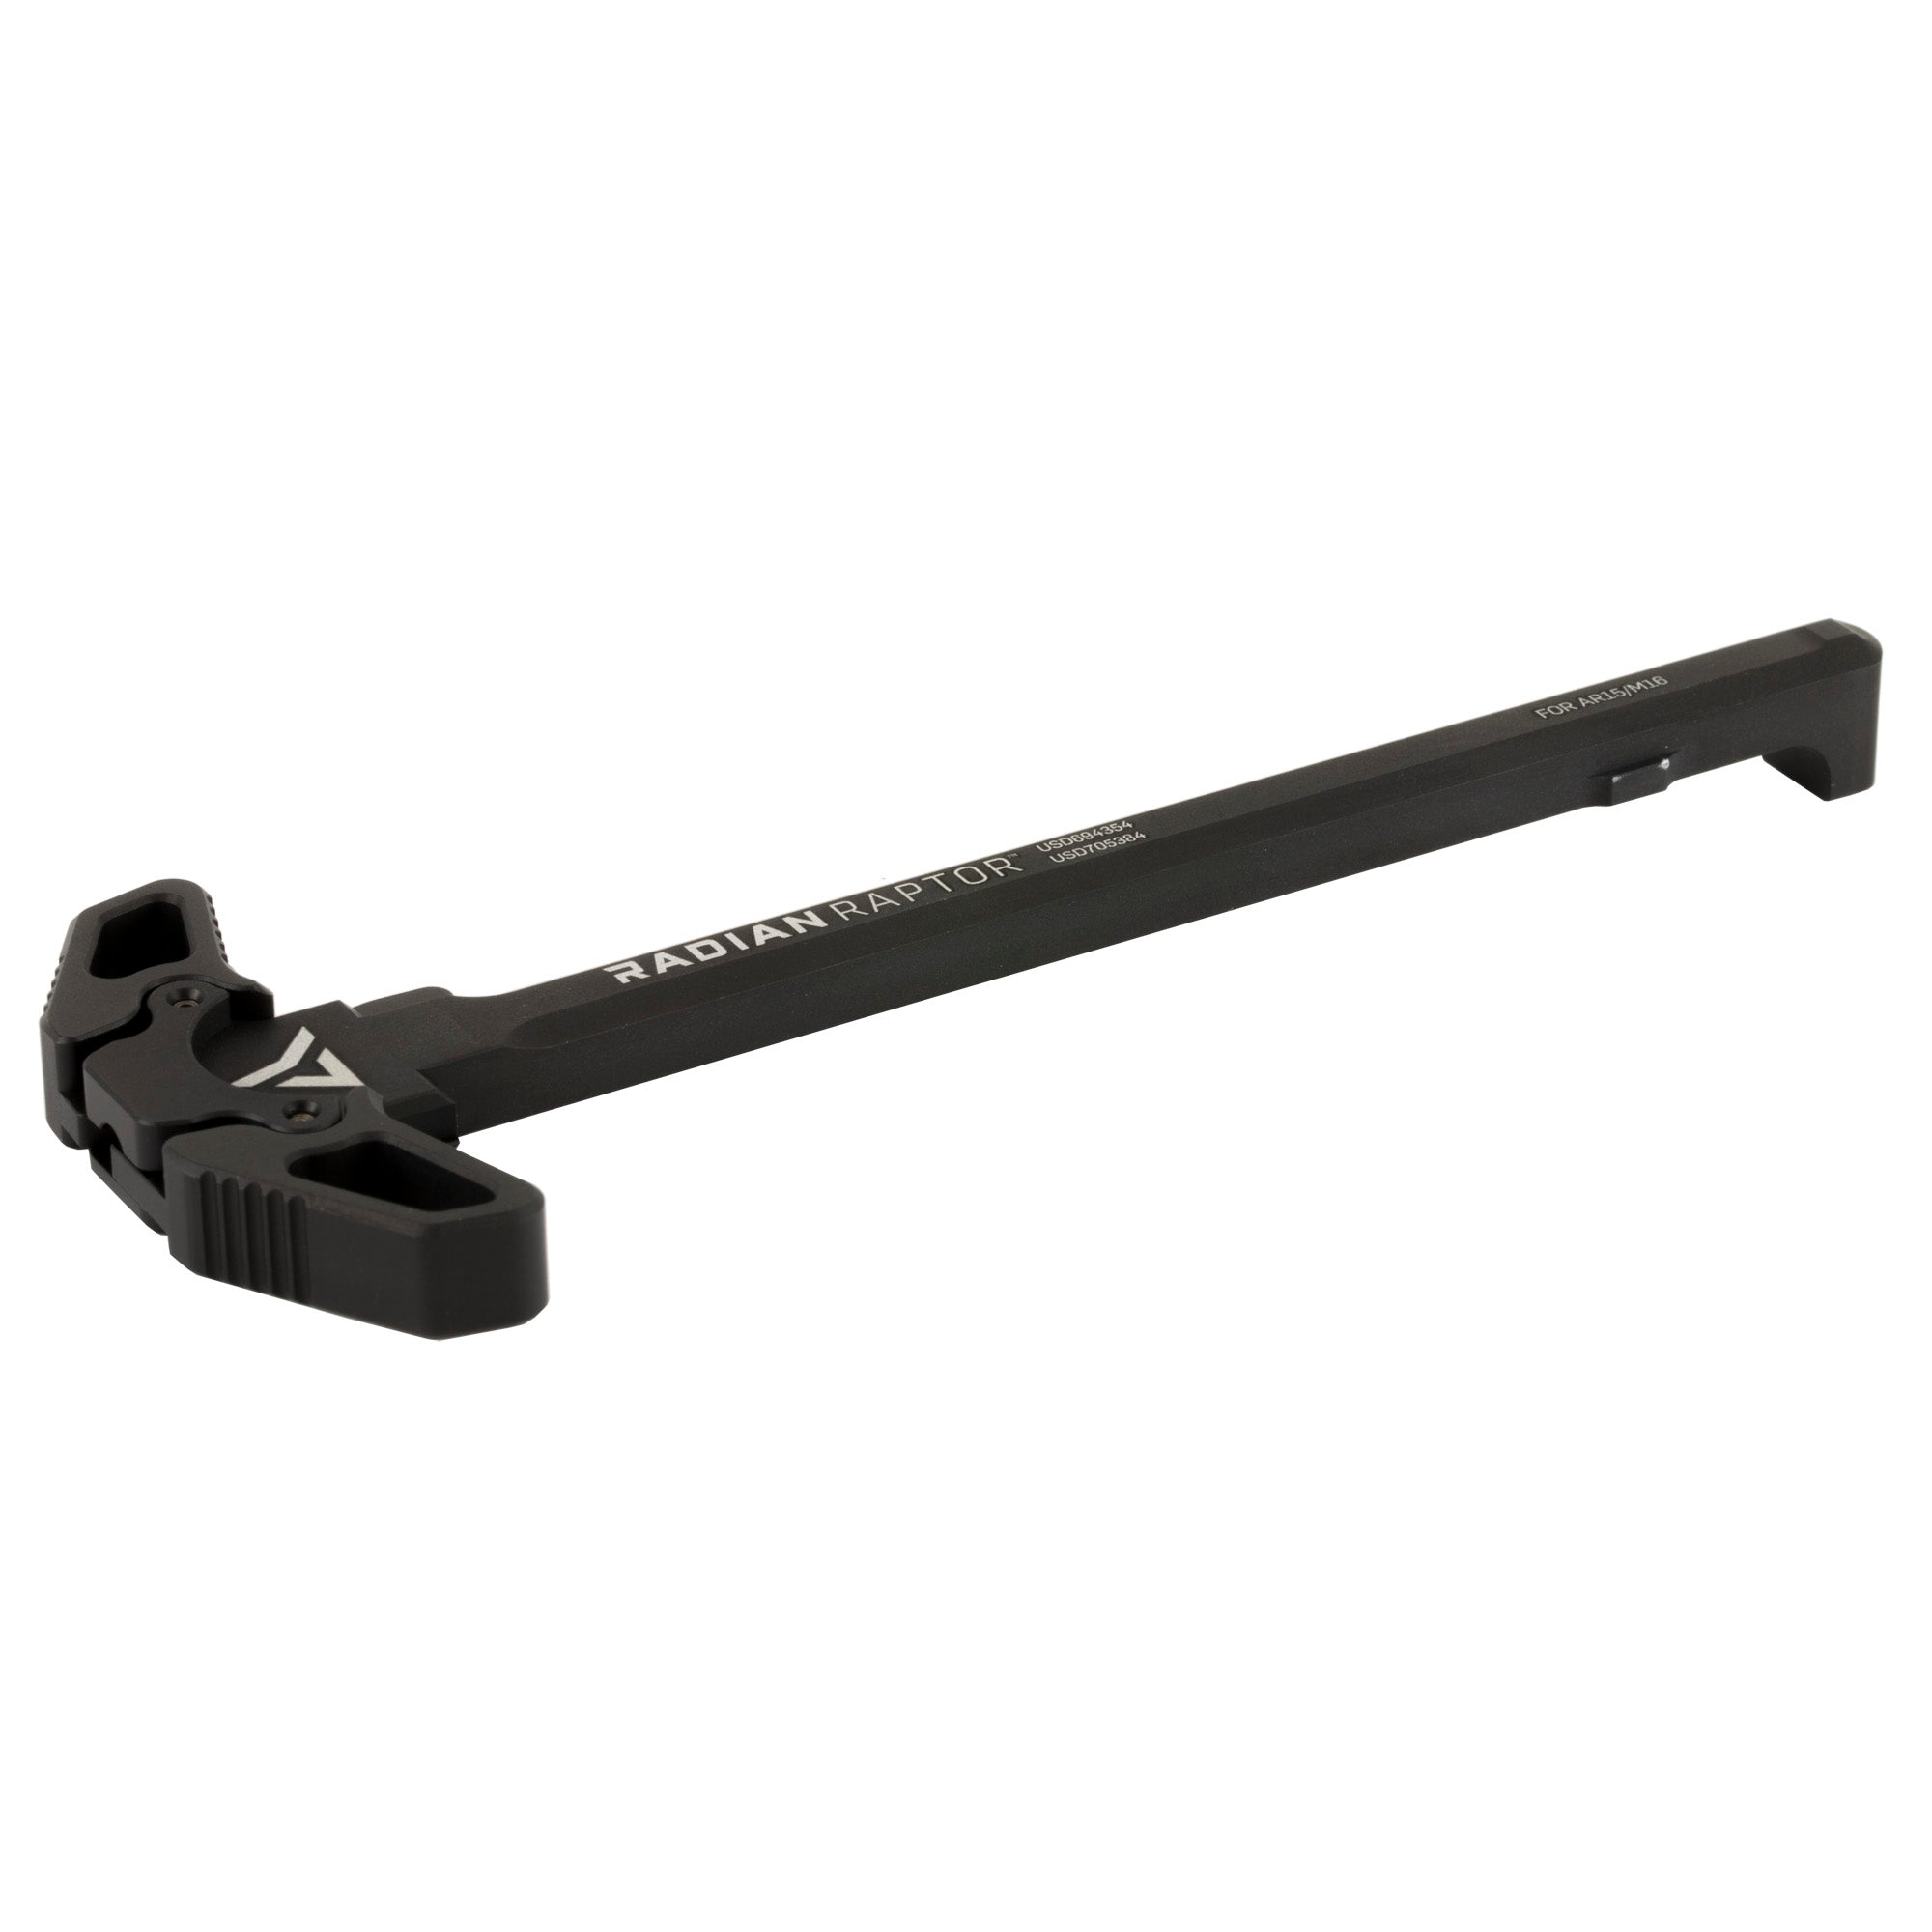 Black Anodized AR-15 Raptor Ambidextrous Charging Handle, featuring its durable construction and ergonomic design for seamless rifle operation.